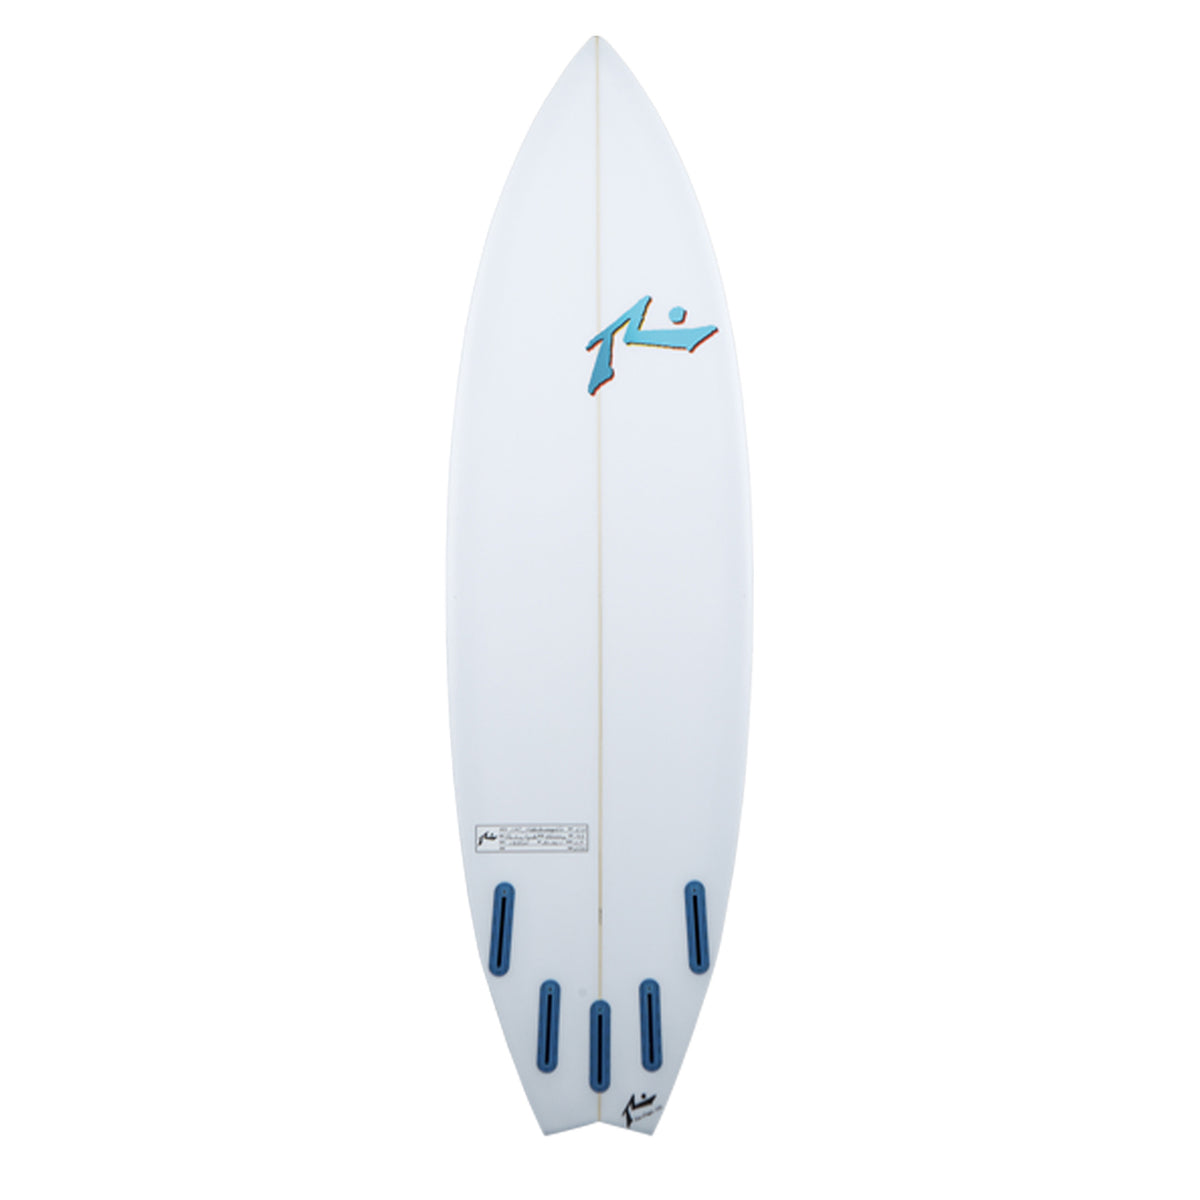 Barking Spider - High Performance Shortboard - Rusty Surfboards - Bottom View